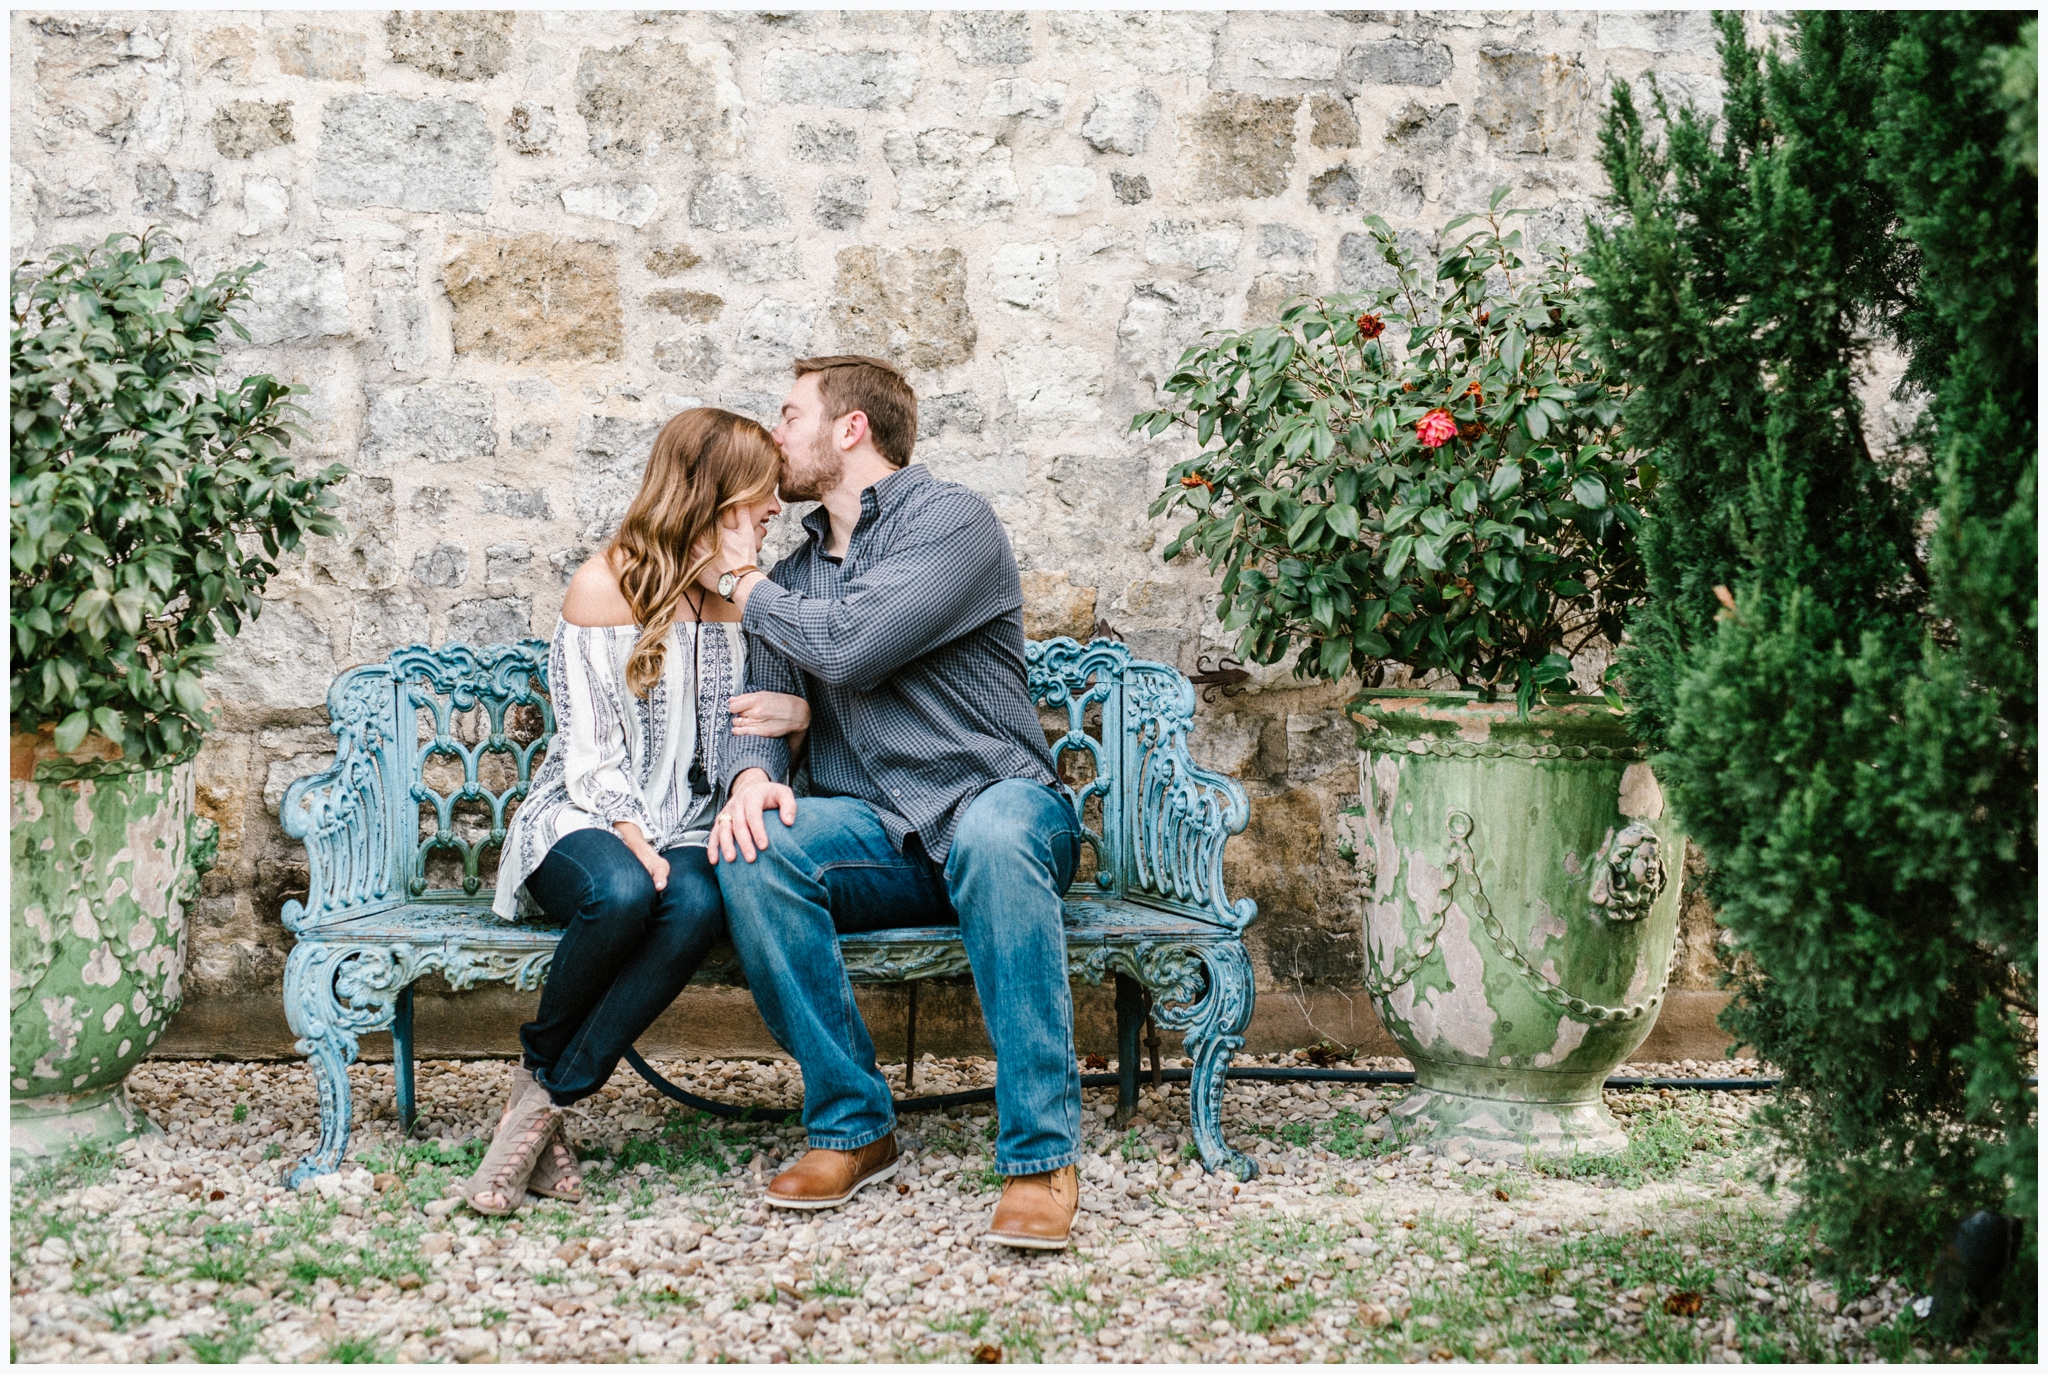 joslyn-holtfort-photography-engagement-session-le-san-michele-buda-texas_0004